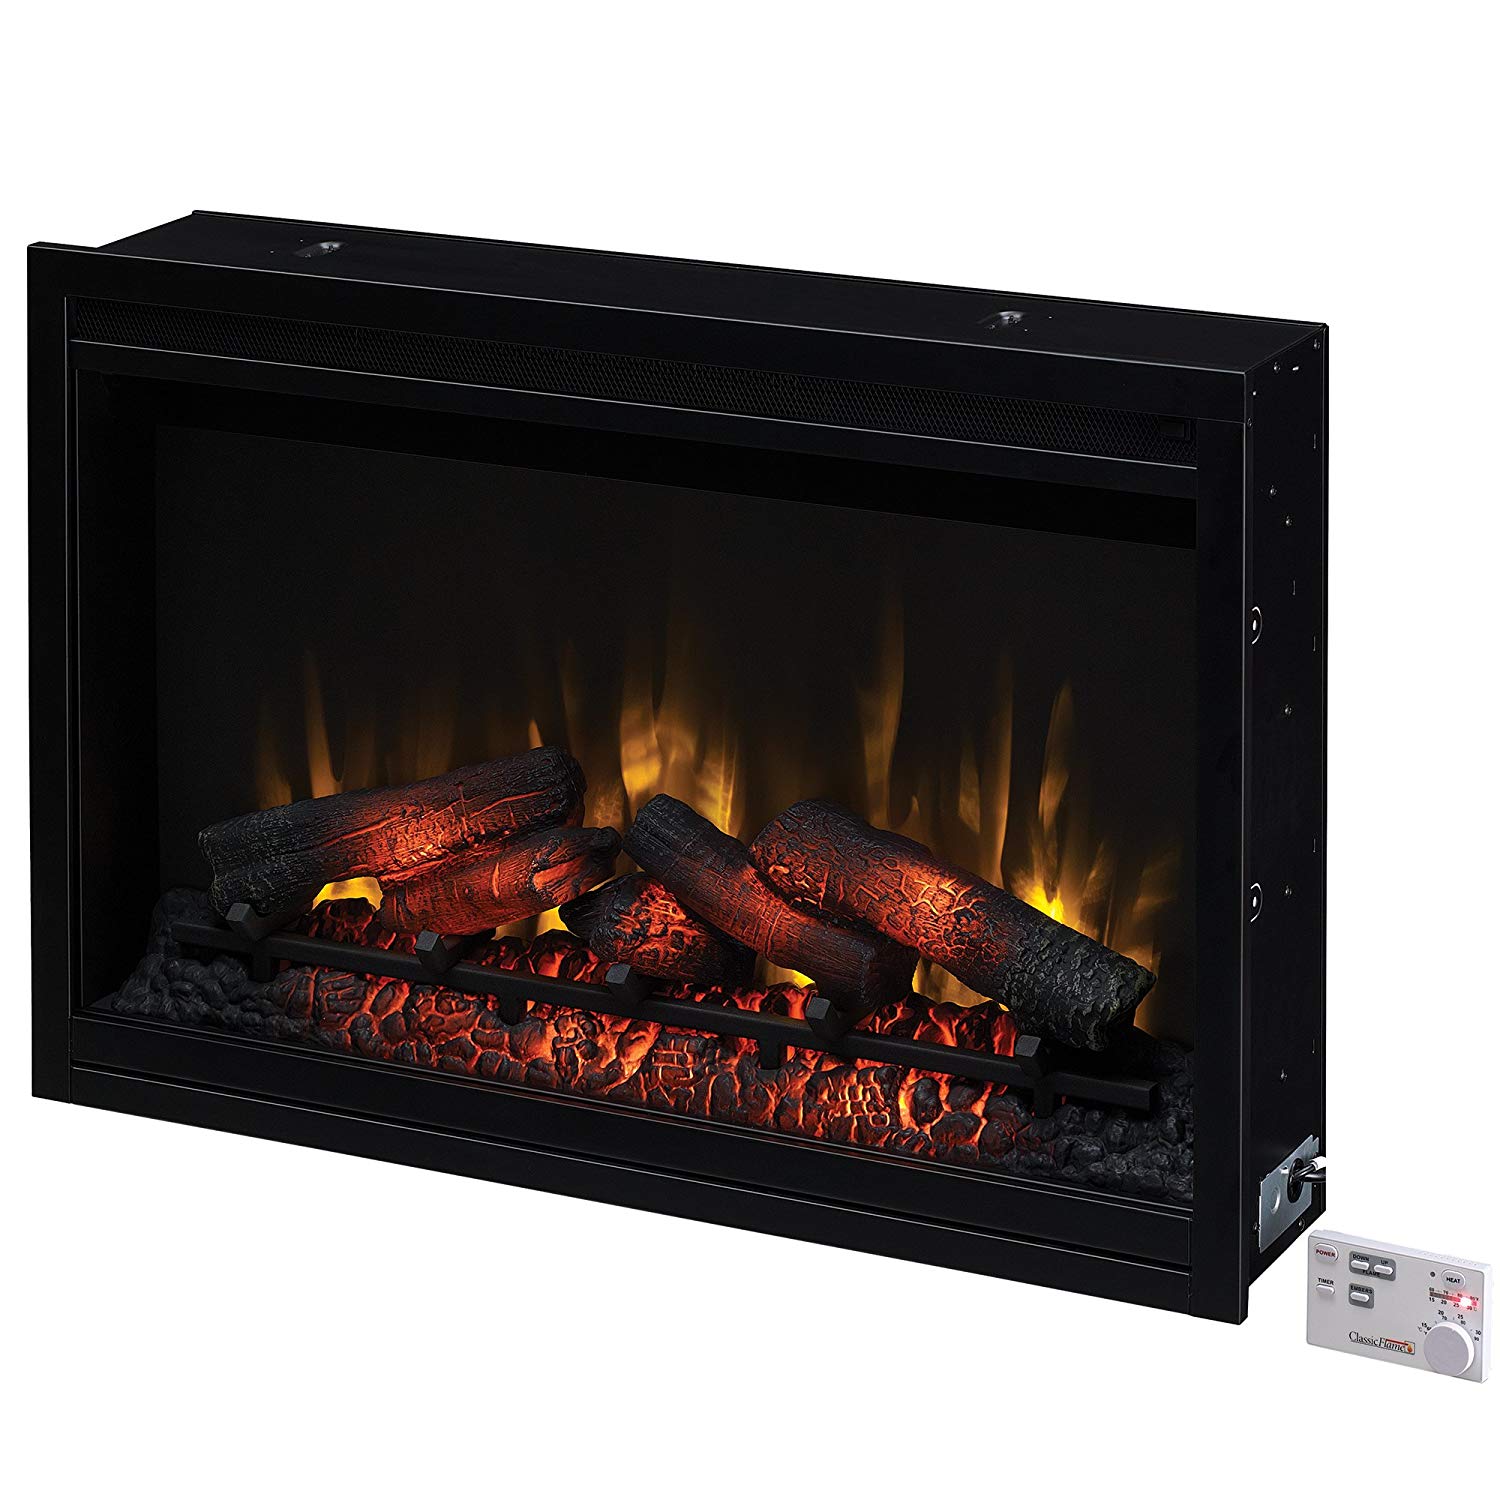 10 Best Fireplace Inserts Nov 2021, How To Install Ashley Fireplace Insert